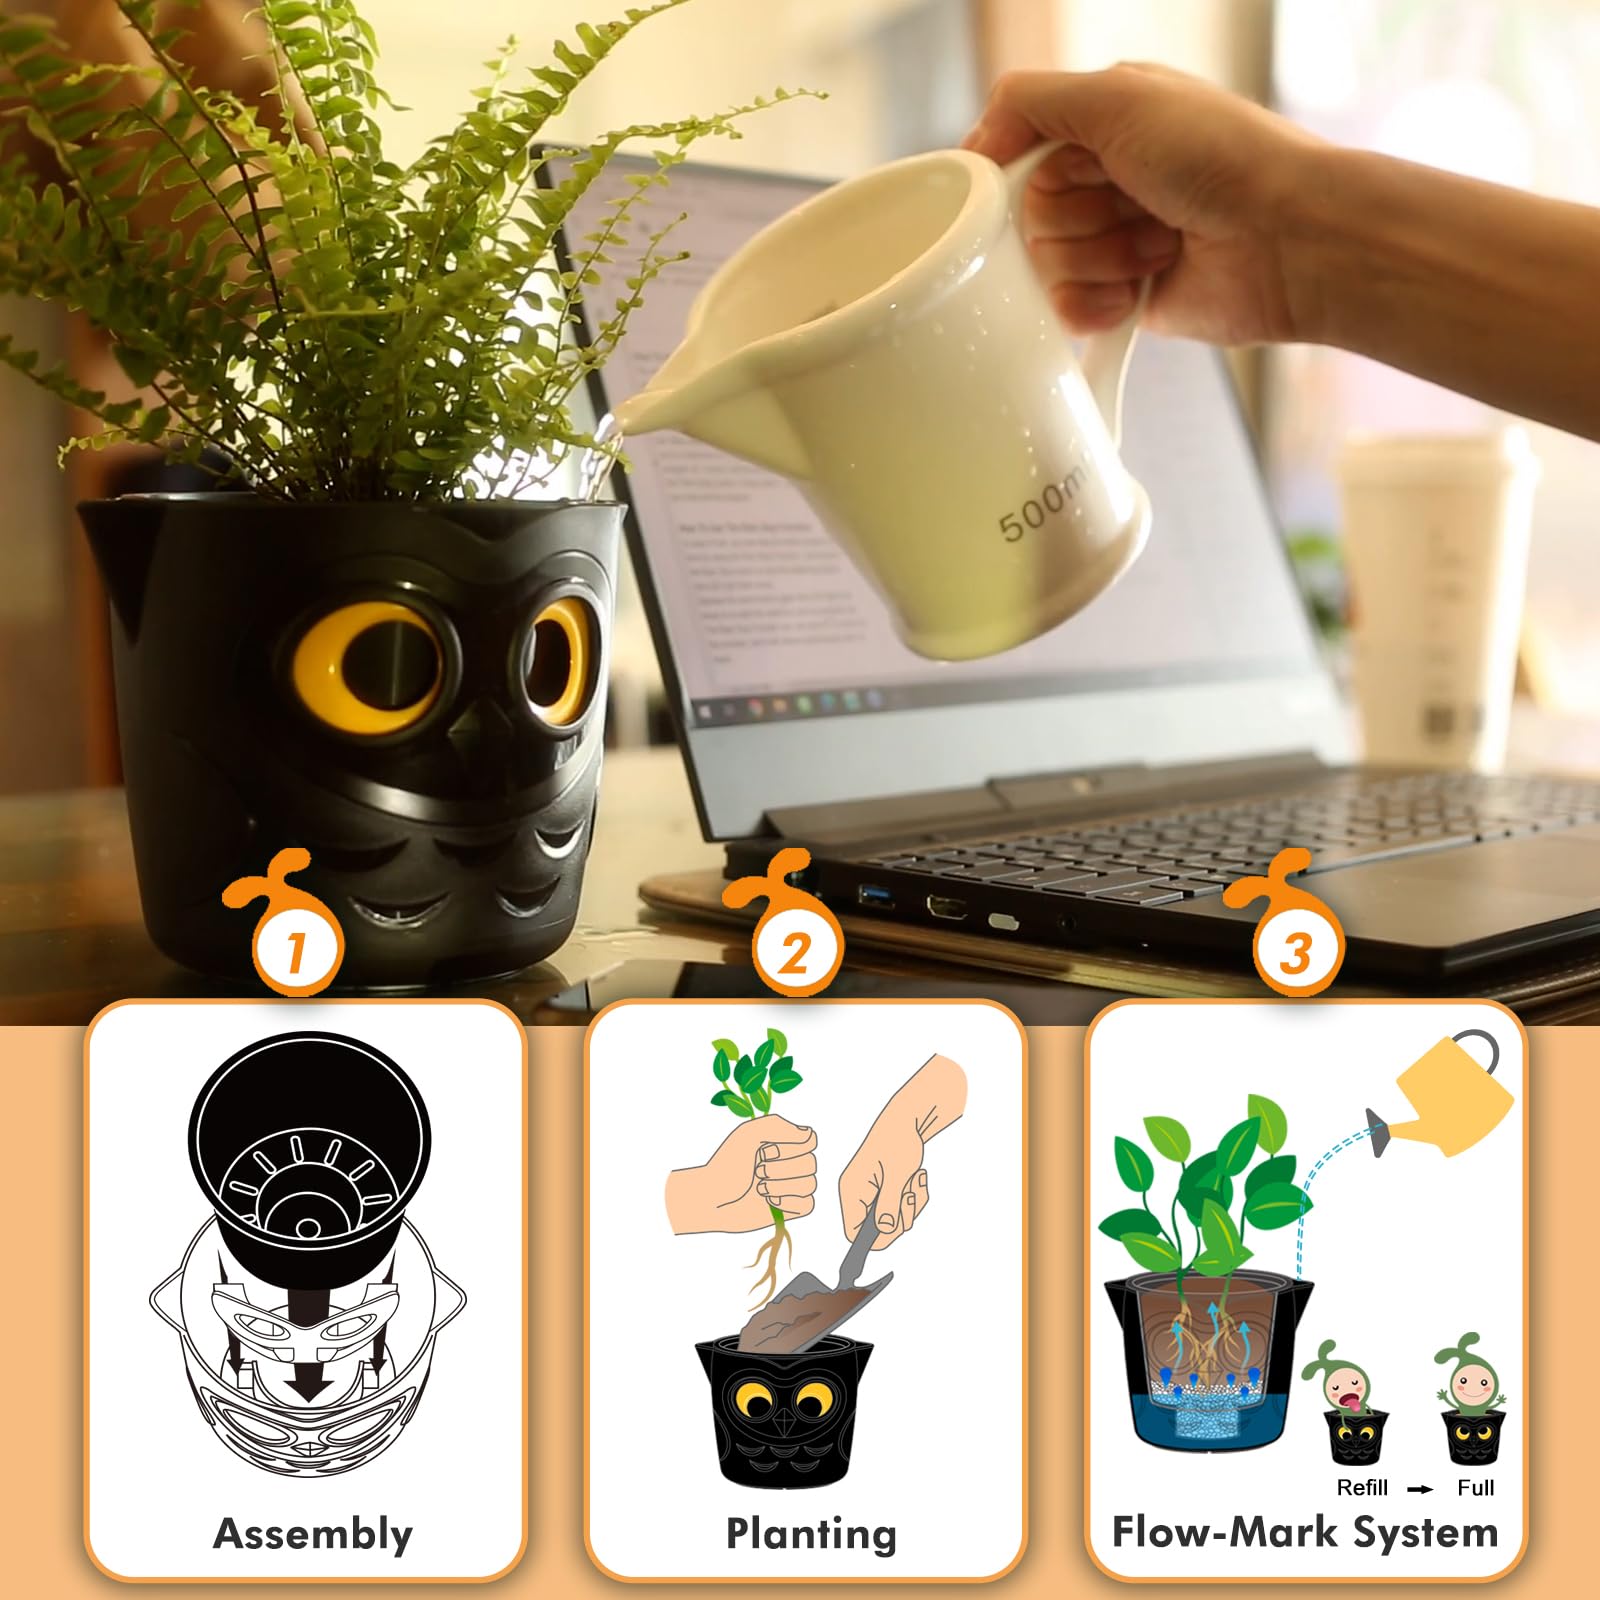 Restmo 3 Pack Plant Pots, 5” Self Watering Planters for Indoor Plants, Plastic Flower Pots with Owl Eye Water Level Indicator, for House Plants, African Violet, Succulents, Monstera, Dark Black